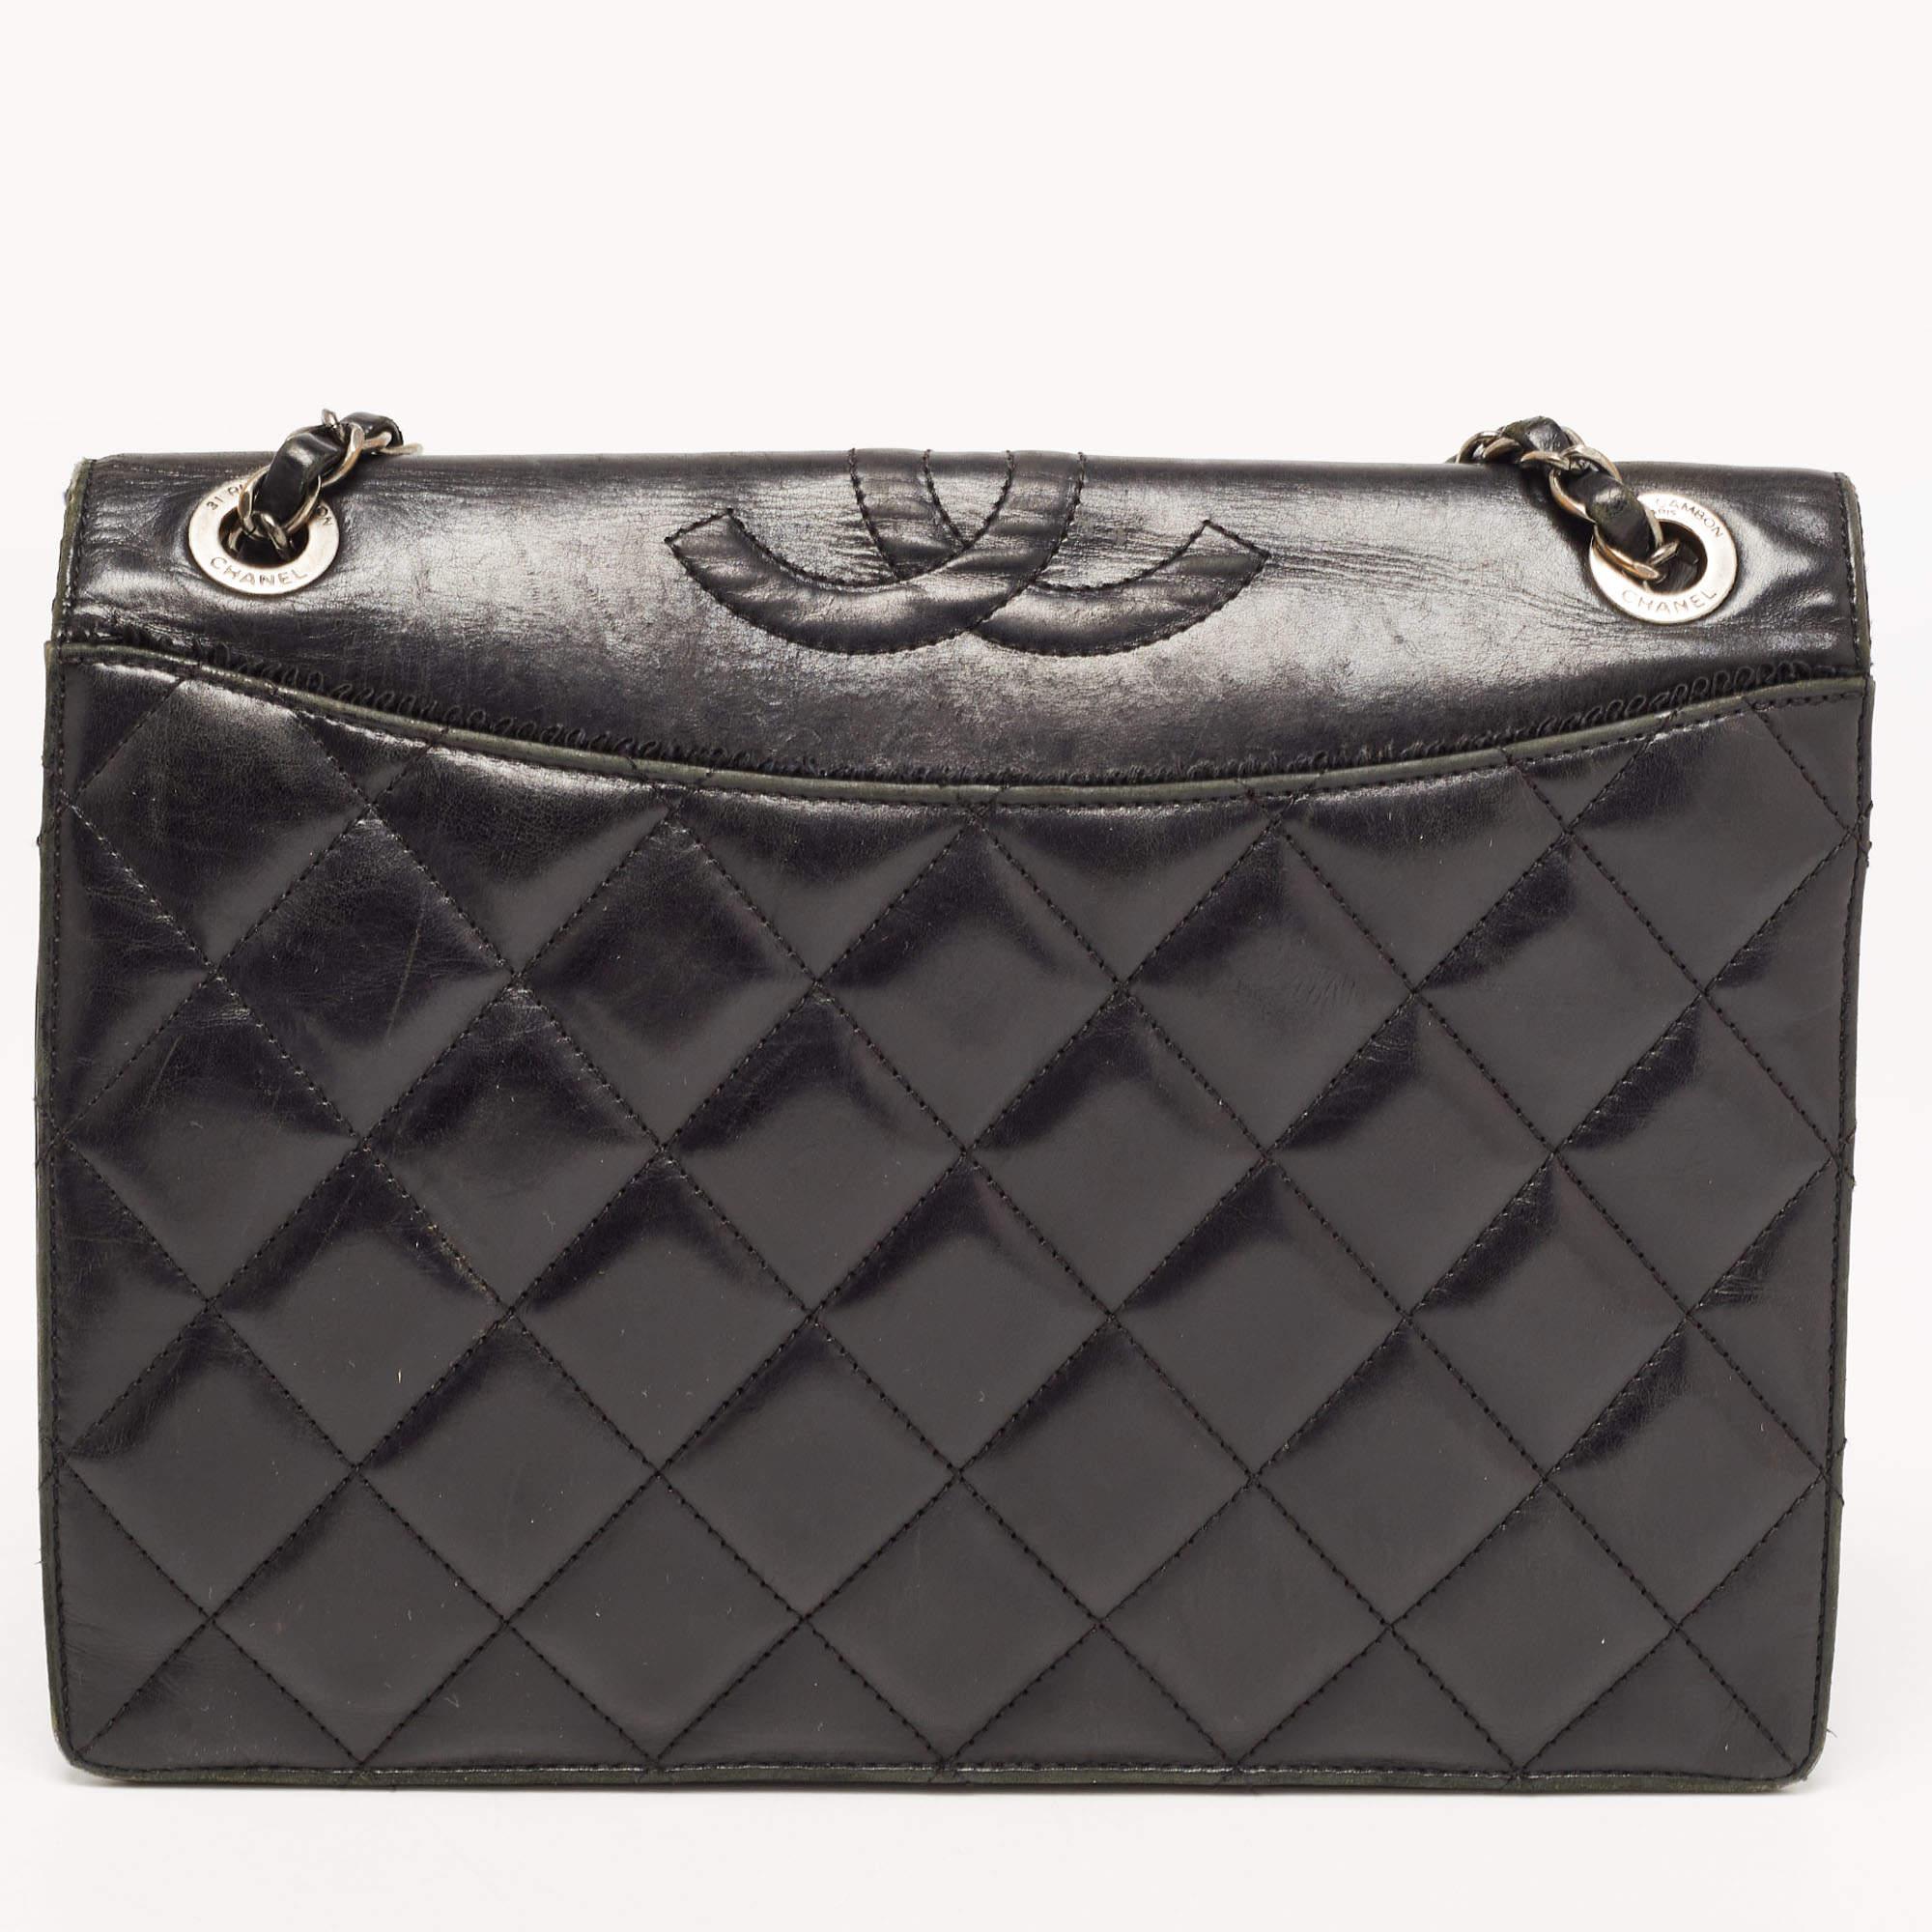 Chanel ensures you have a wonderful accessory to accompany you every day with this well-crafted bag. It has a signature look and a practical size.

